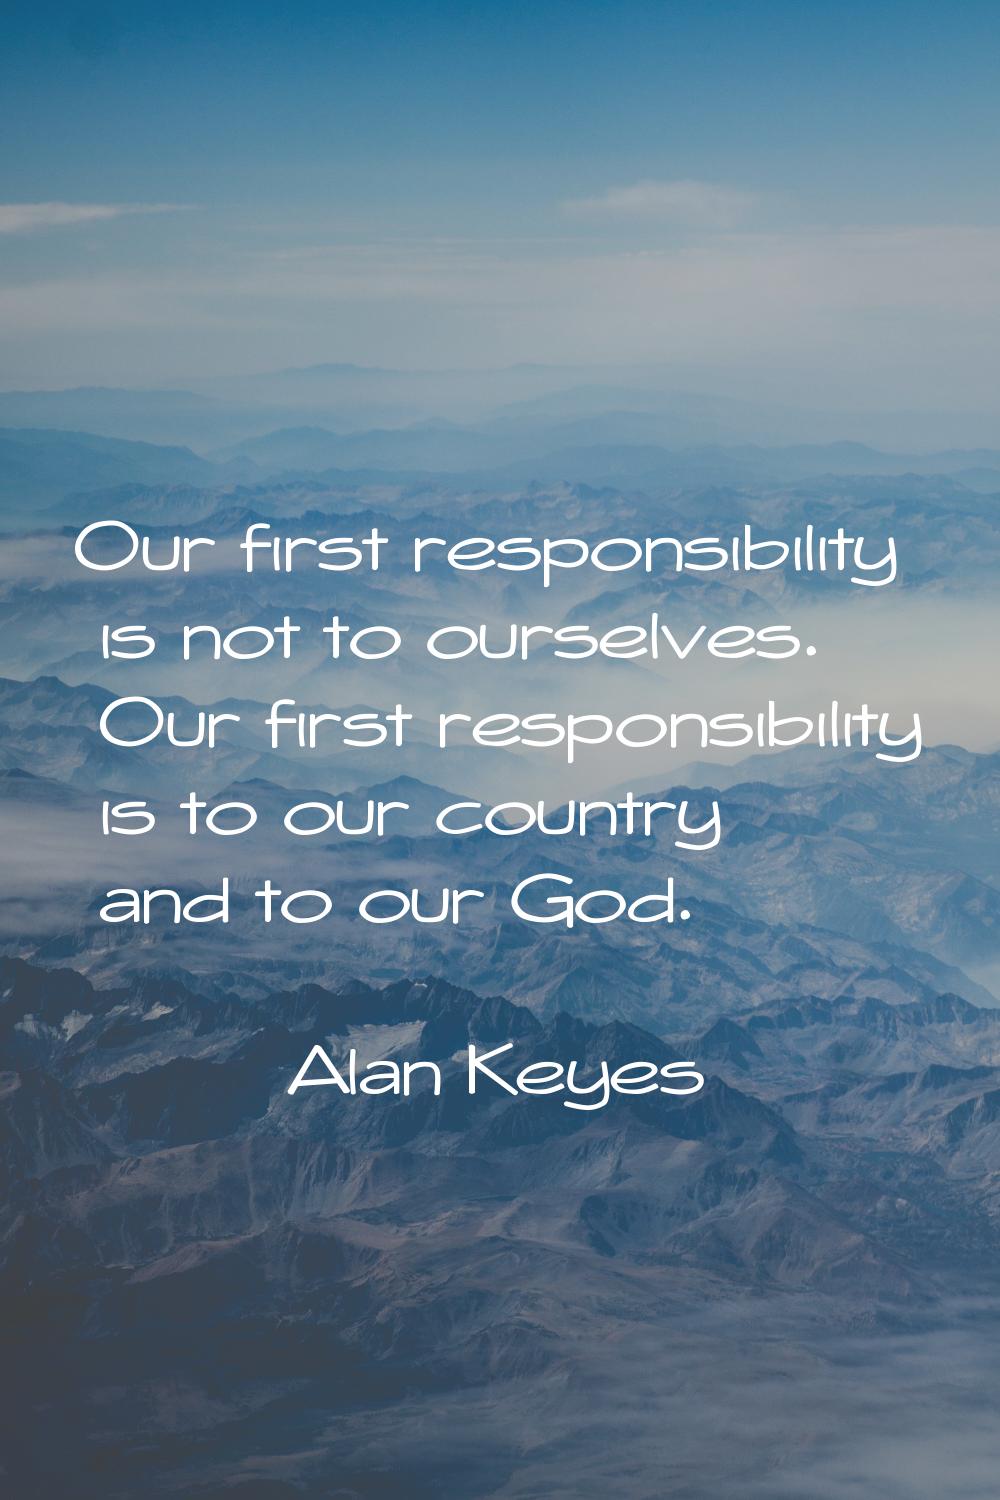 Our first responsibility is not to ourselves. Our first responsibility is to our country and to our